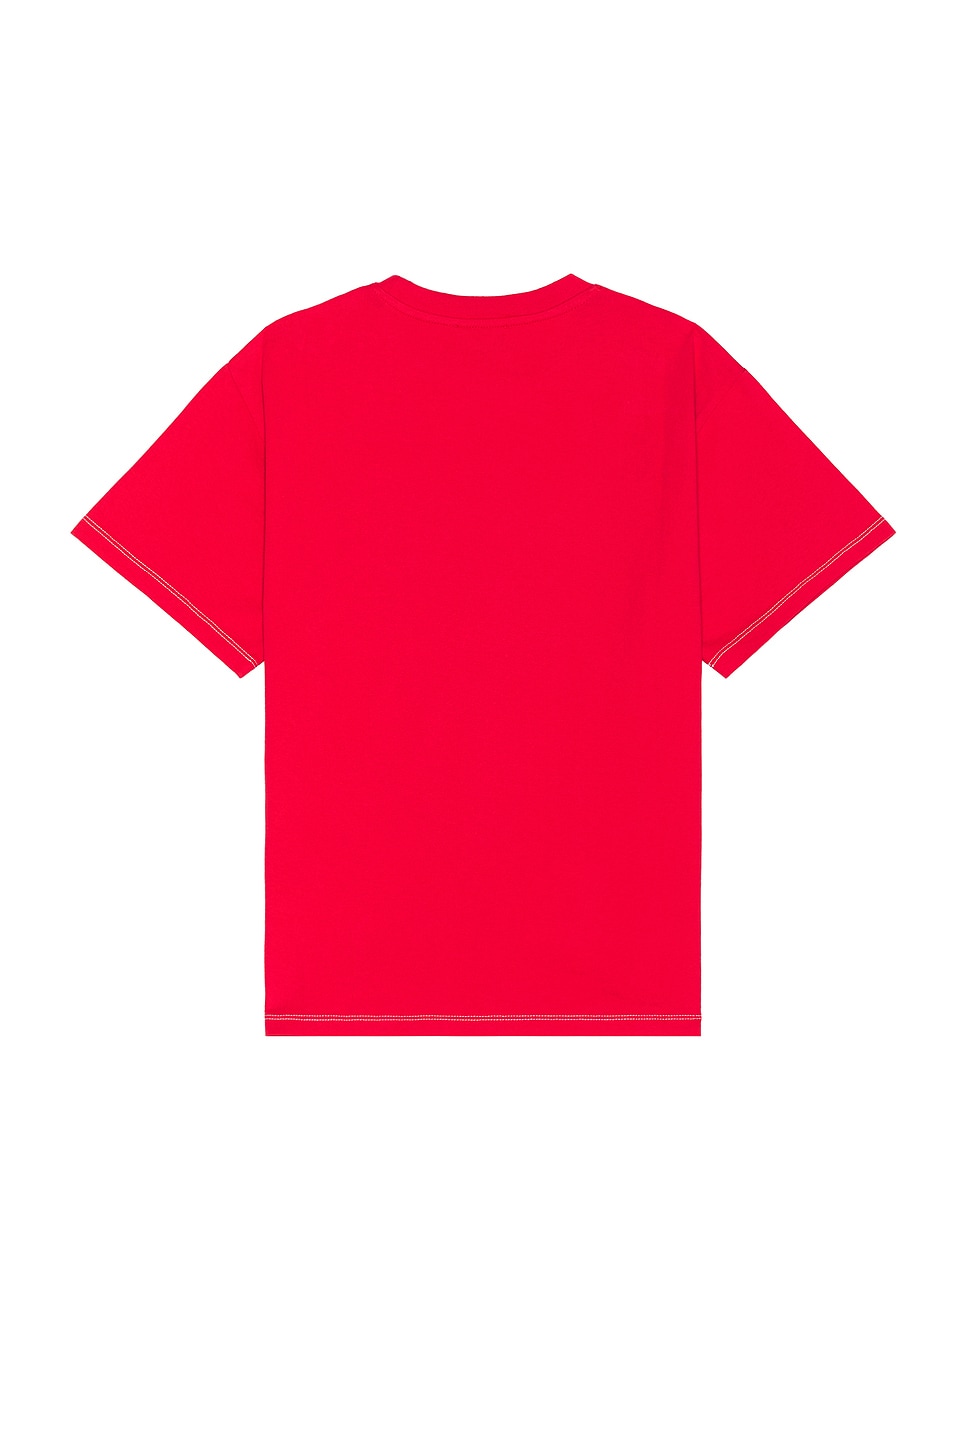 Shop Aries J'adoro  Tee In Red